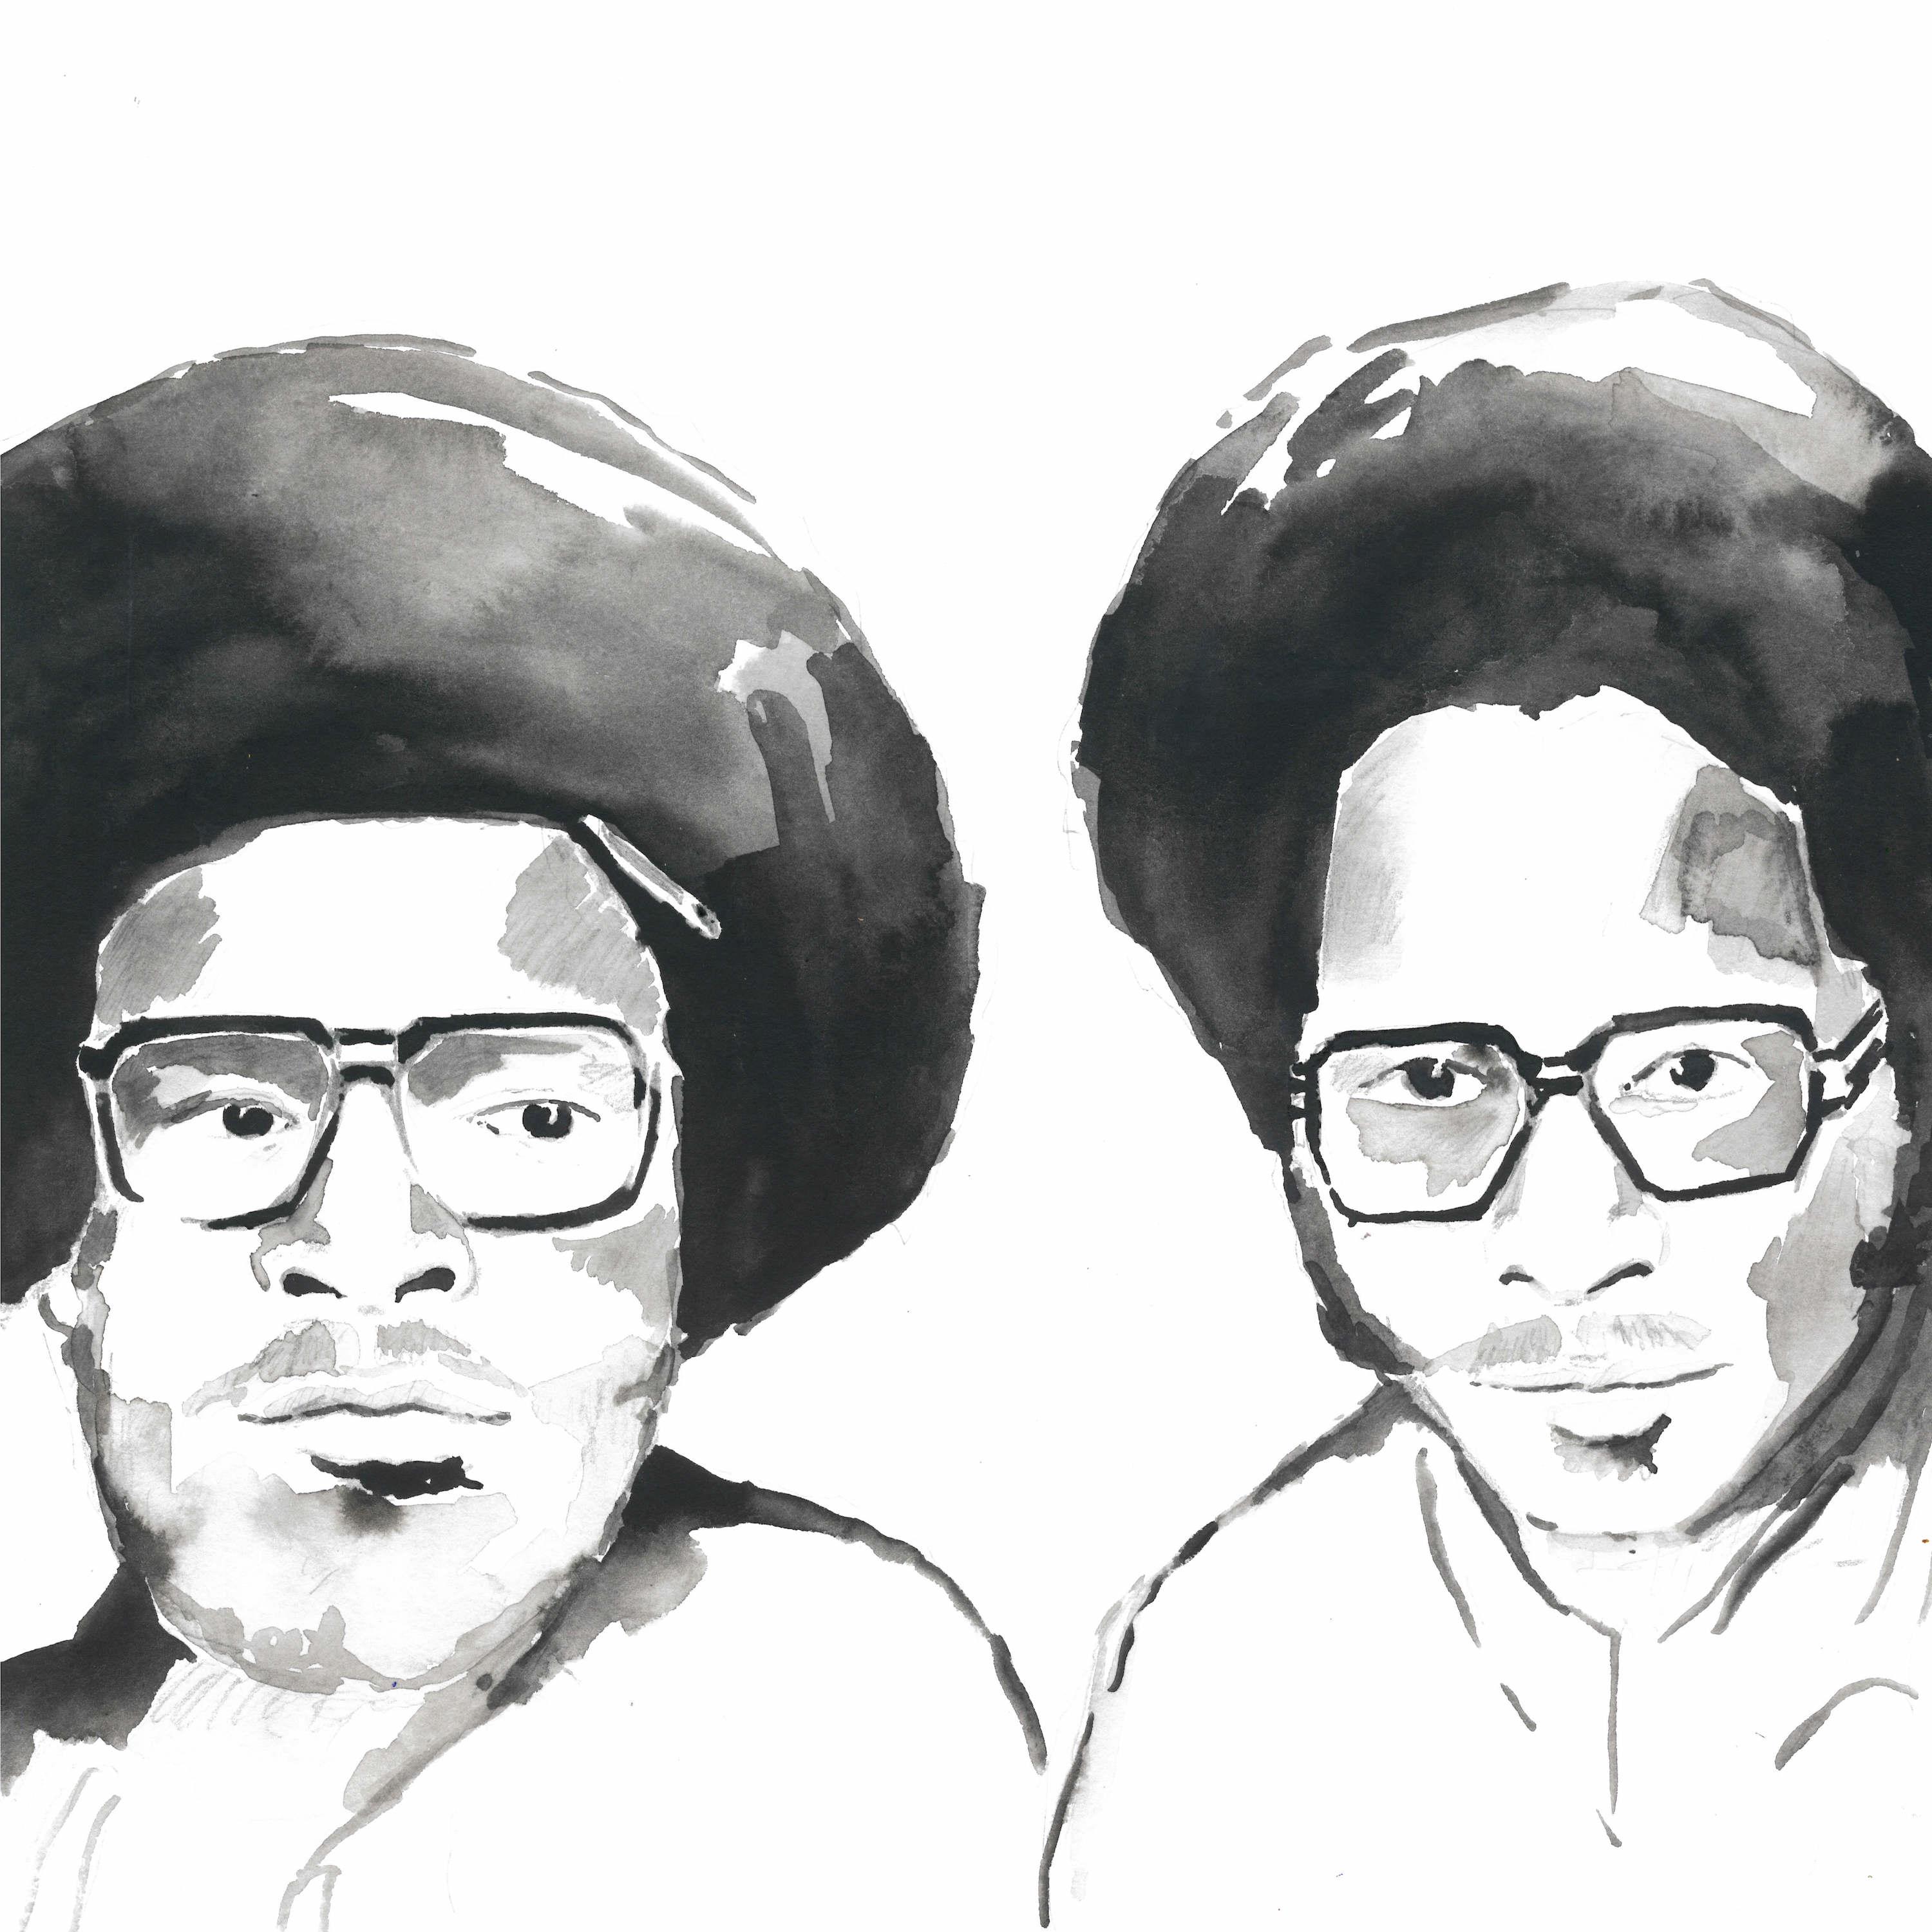 Thumbnail for "Questlove & Boots Riley".